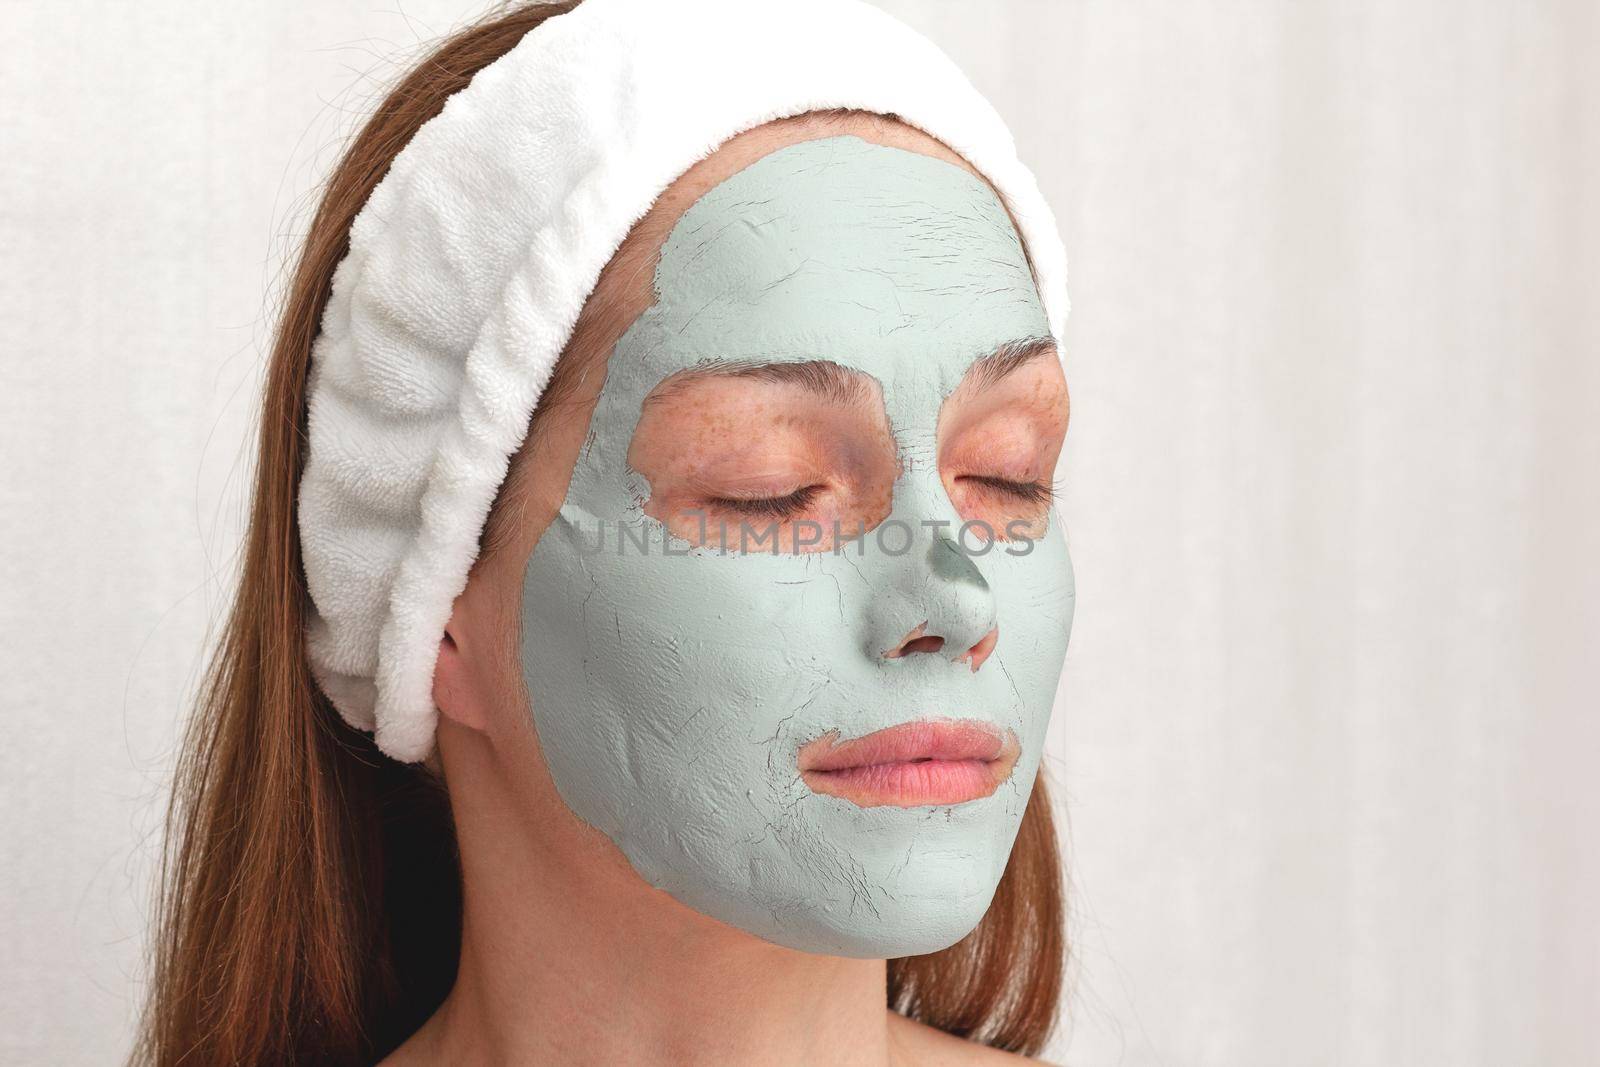 Woman with white band on head with blue dry clay mask on face with closed eyes over white background